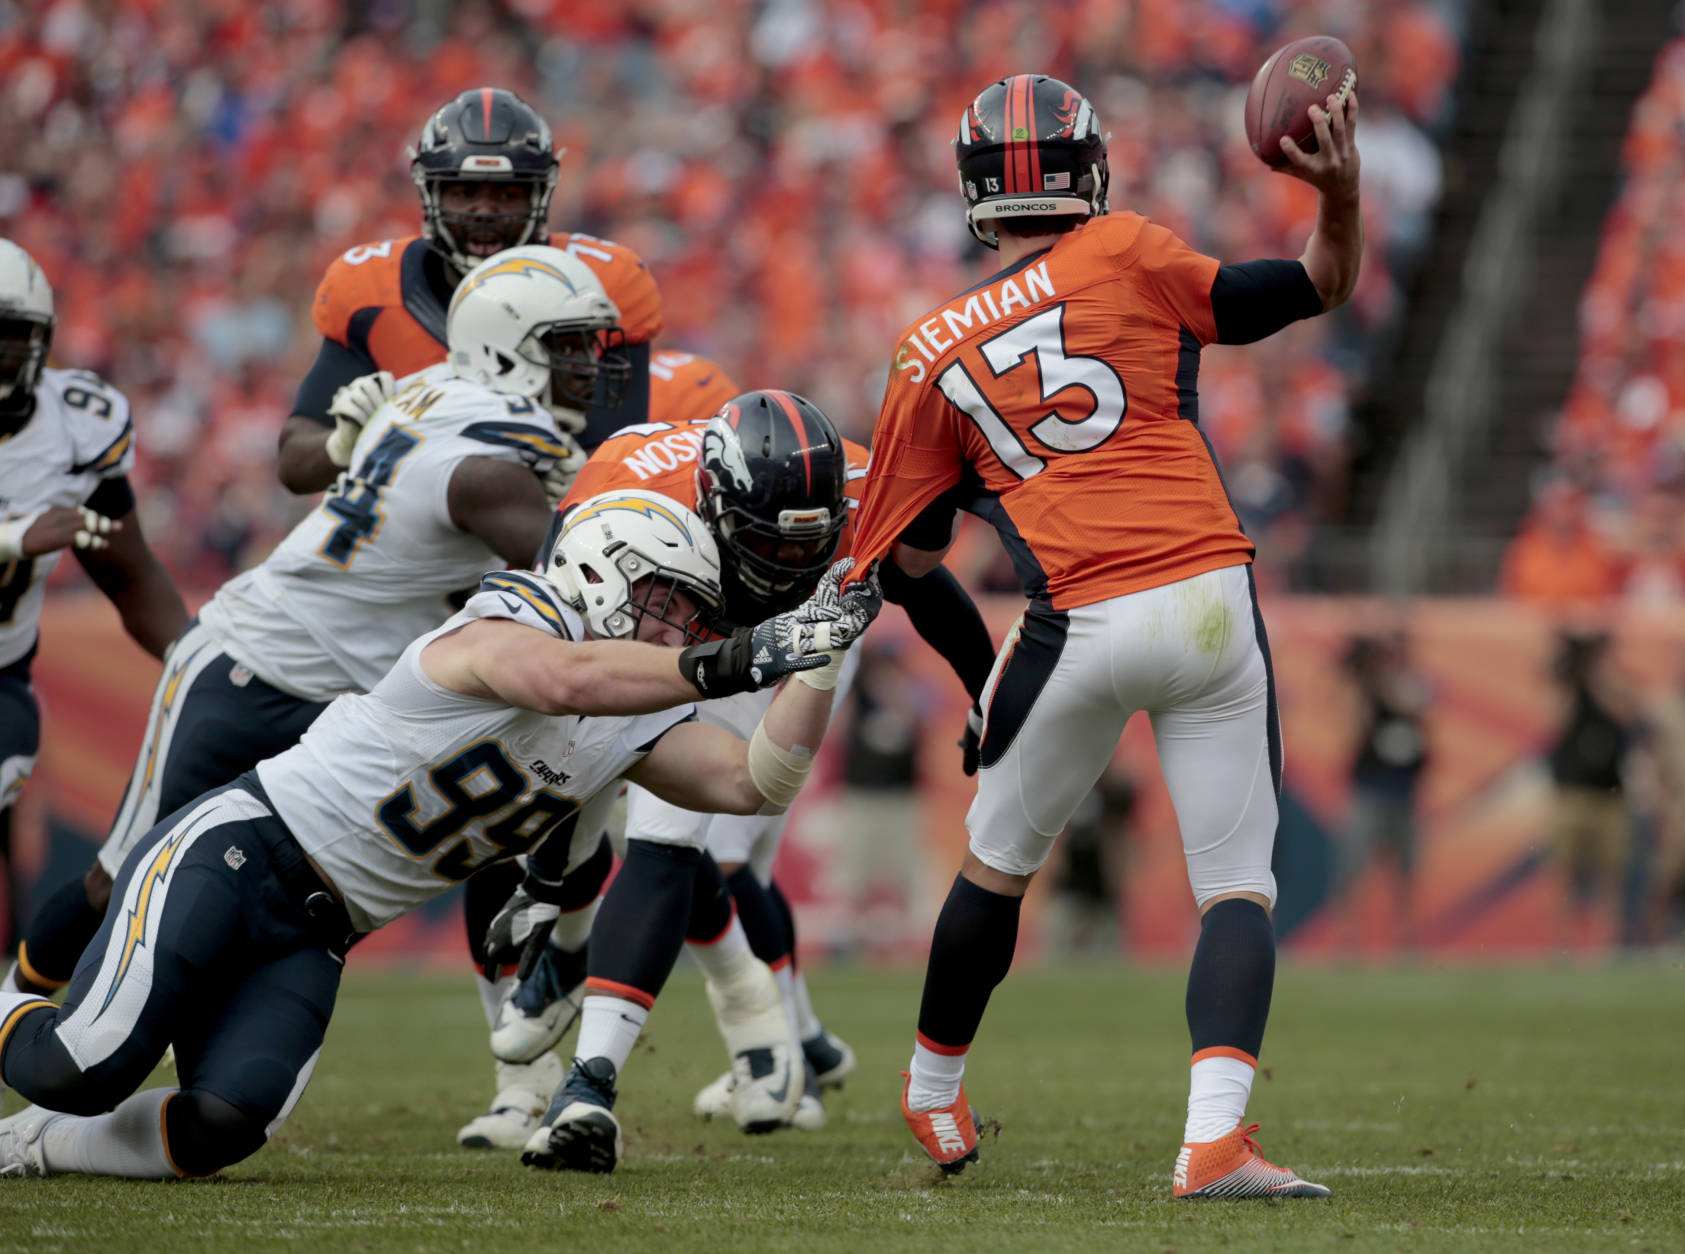 Denver Broncos quarterback Trevor Siemian (13) is pulled down by San Diego Chargers defensive end Joey Bosa (99) during the first half of an NFL football game, Sunday, Oct. 30, 2016, in Denver. (AP Photo/Joe Mahoney)